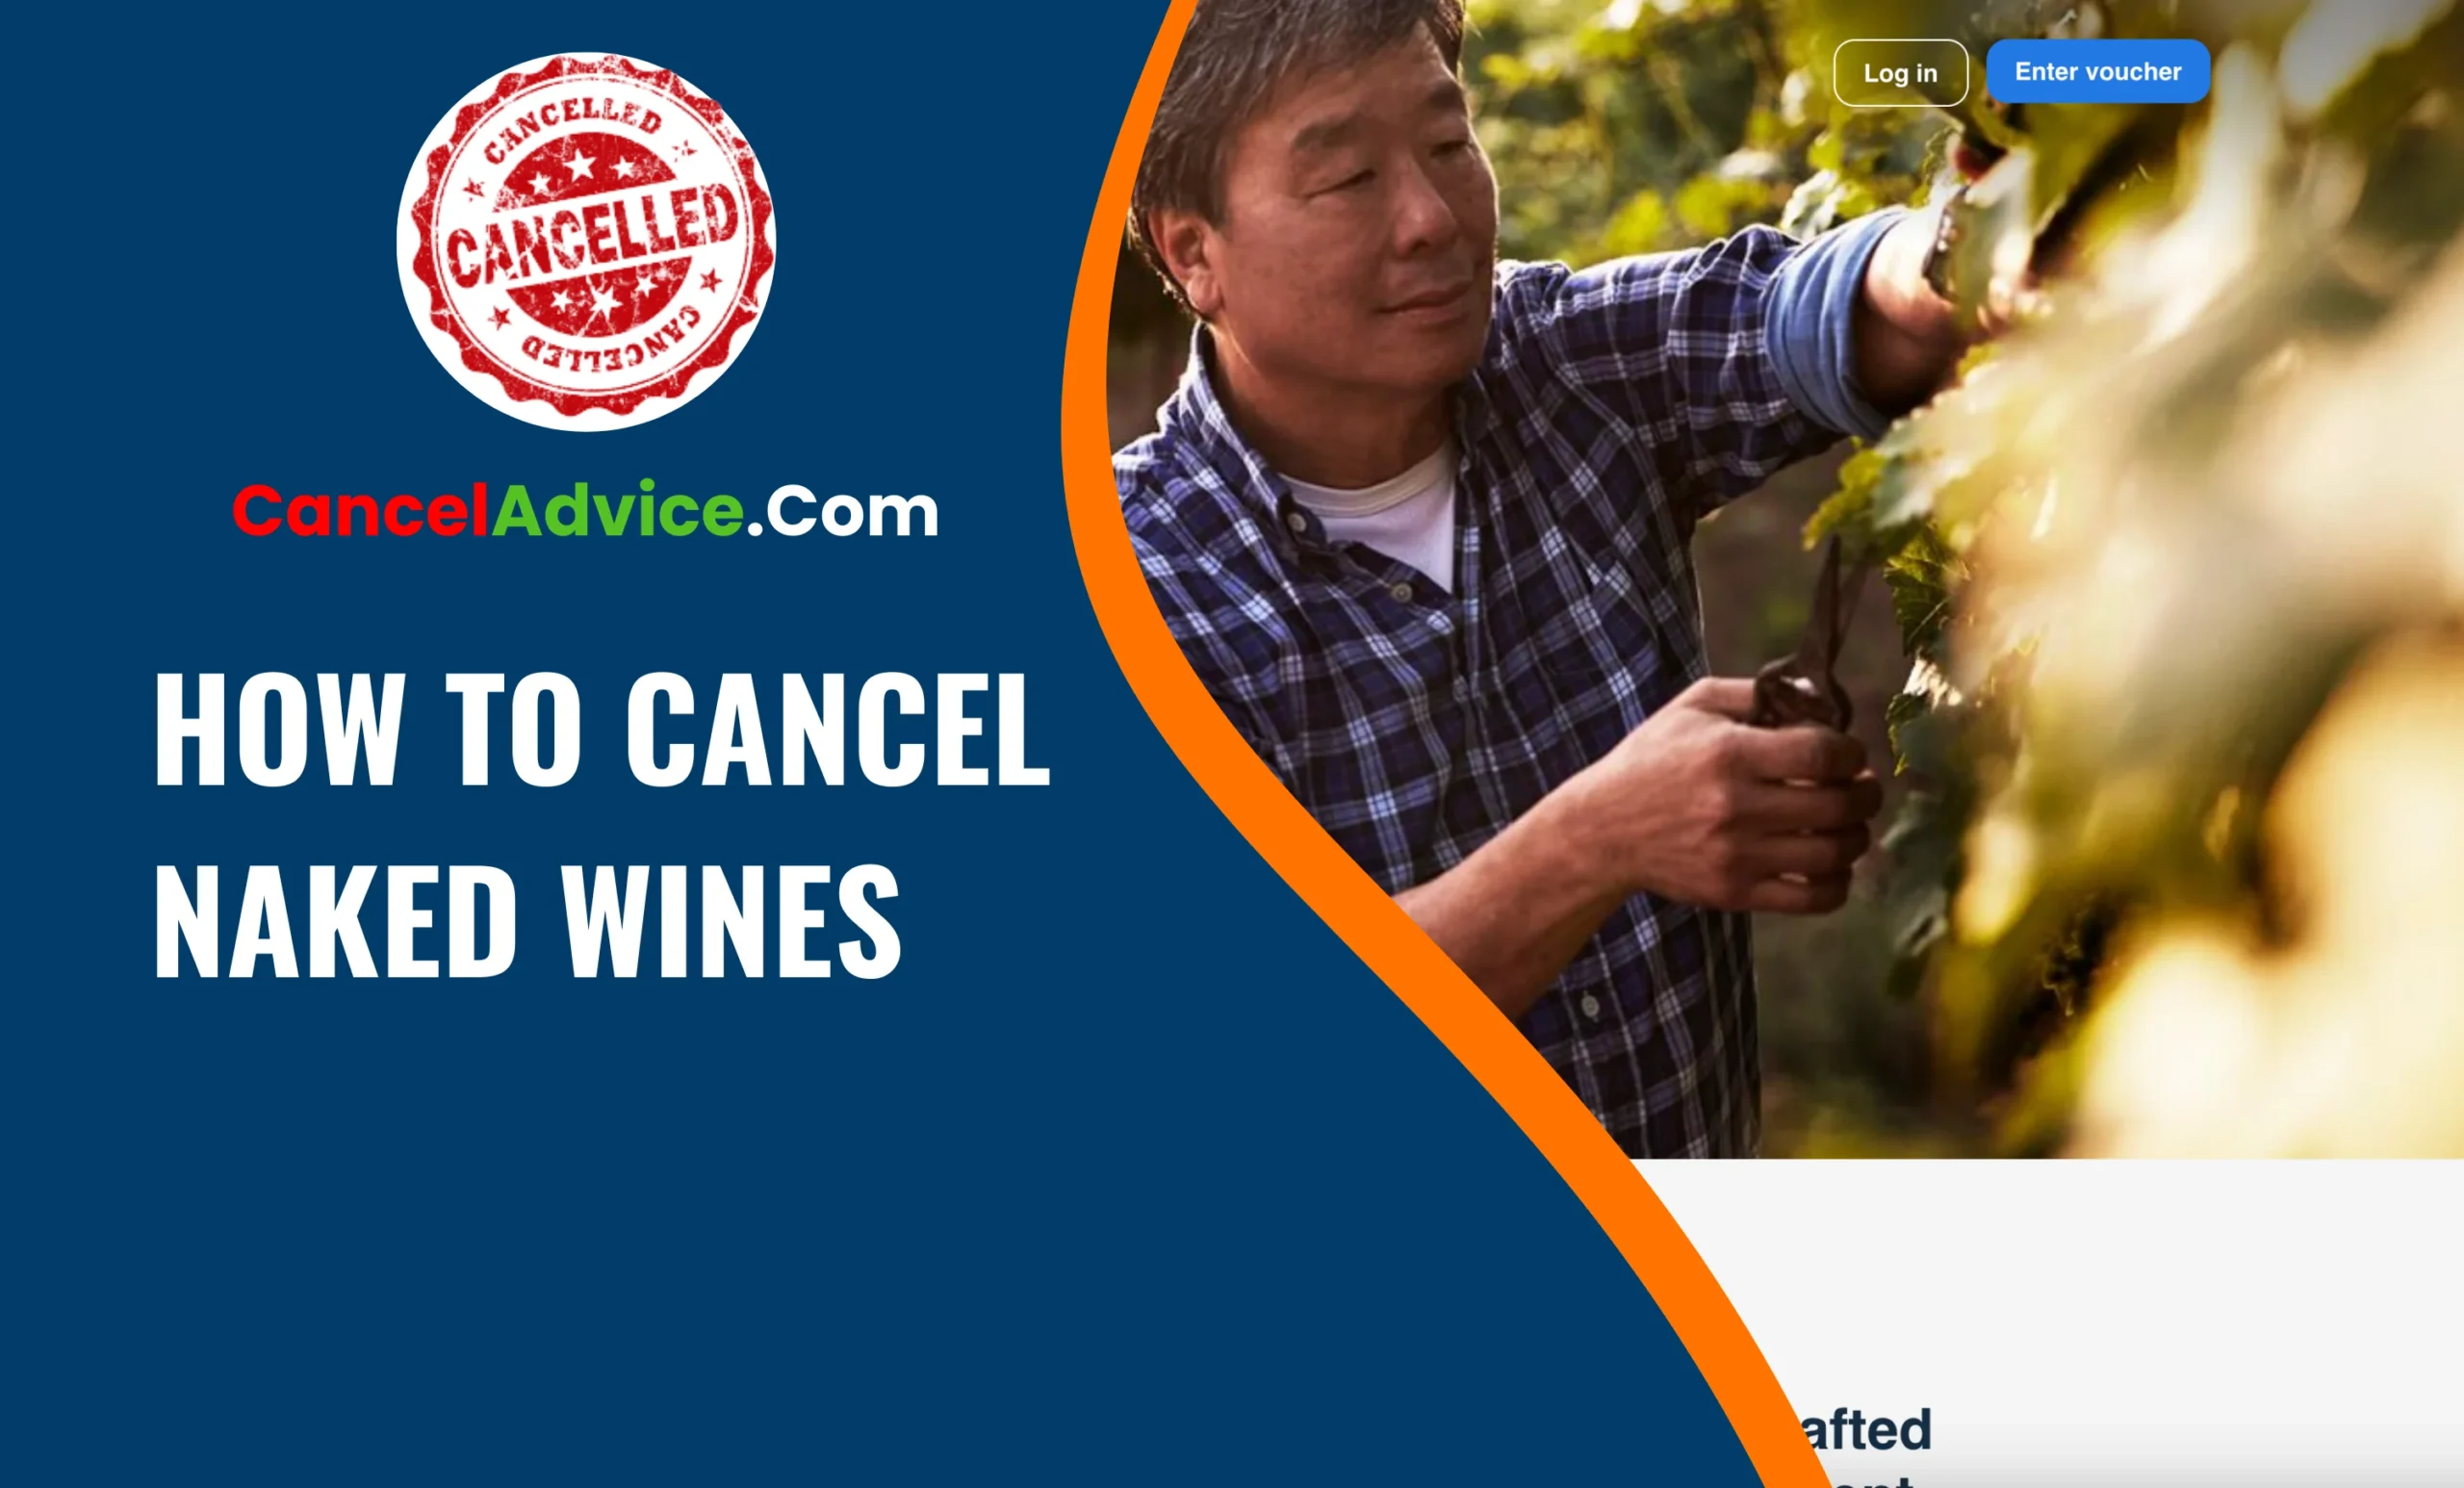 How to Cancel Naked Wines